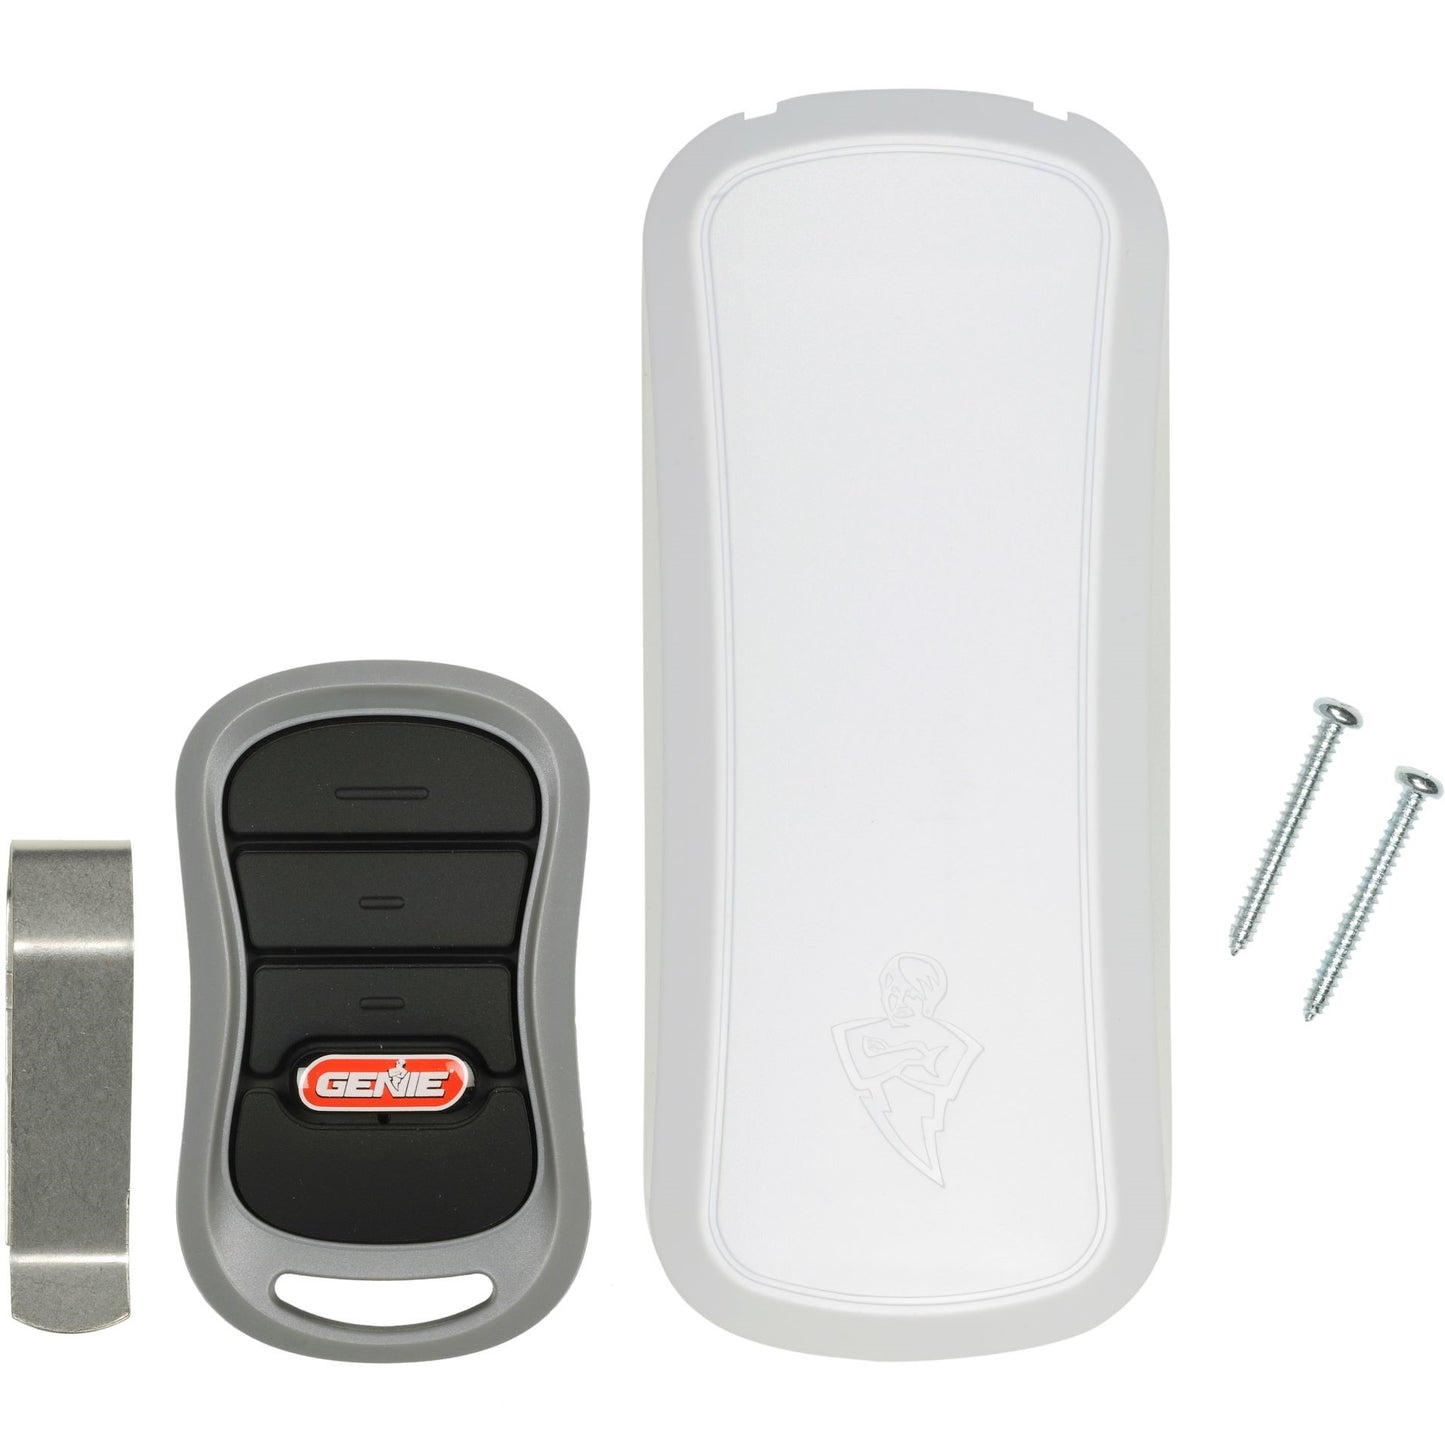 GK-R Keyless Entry and G3T-R Remote Pack